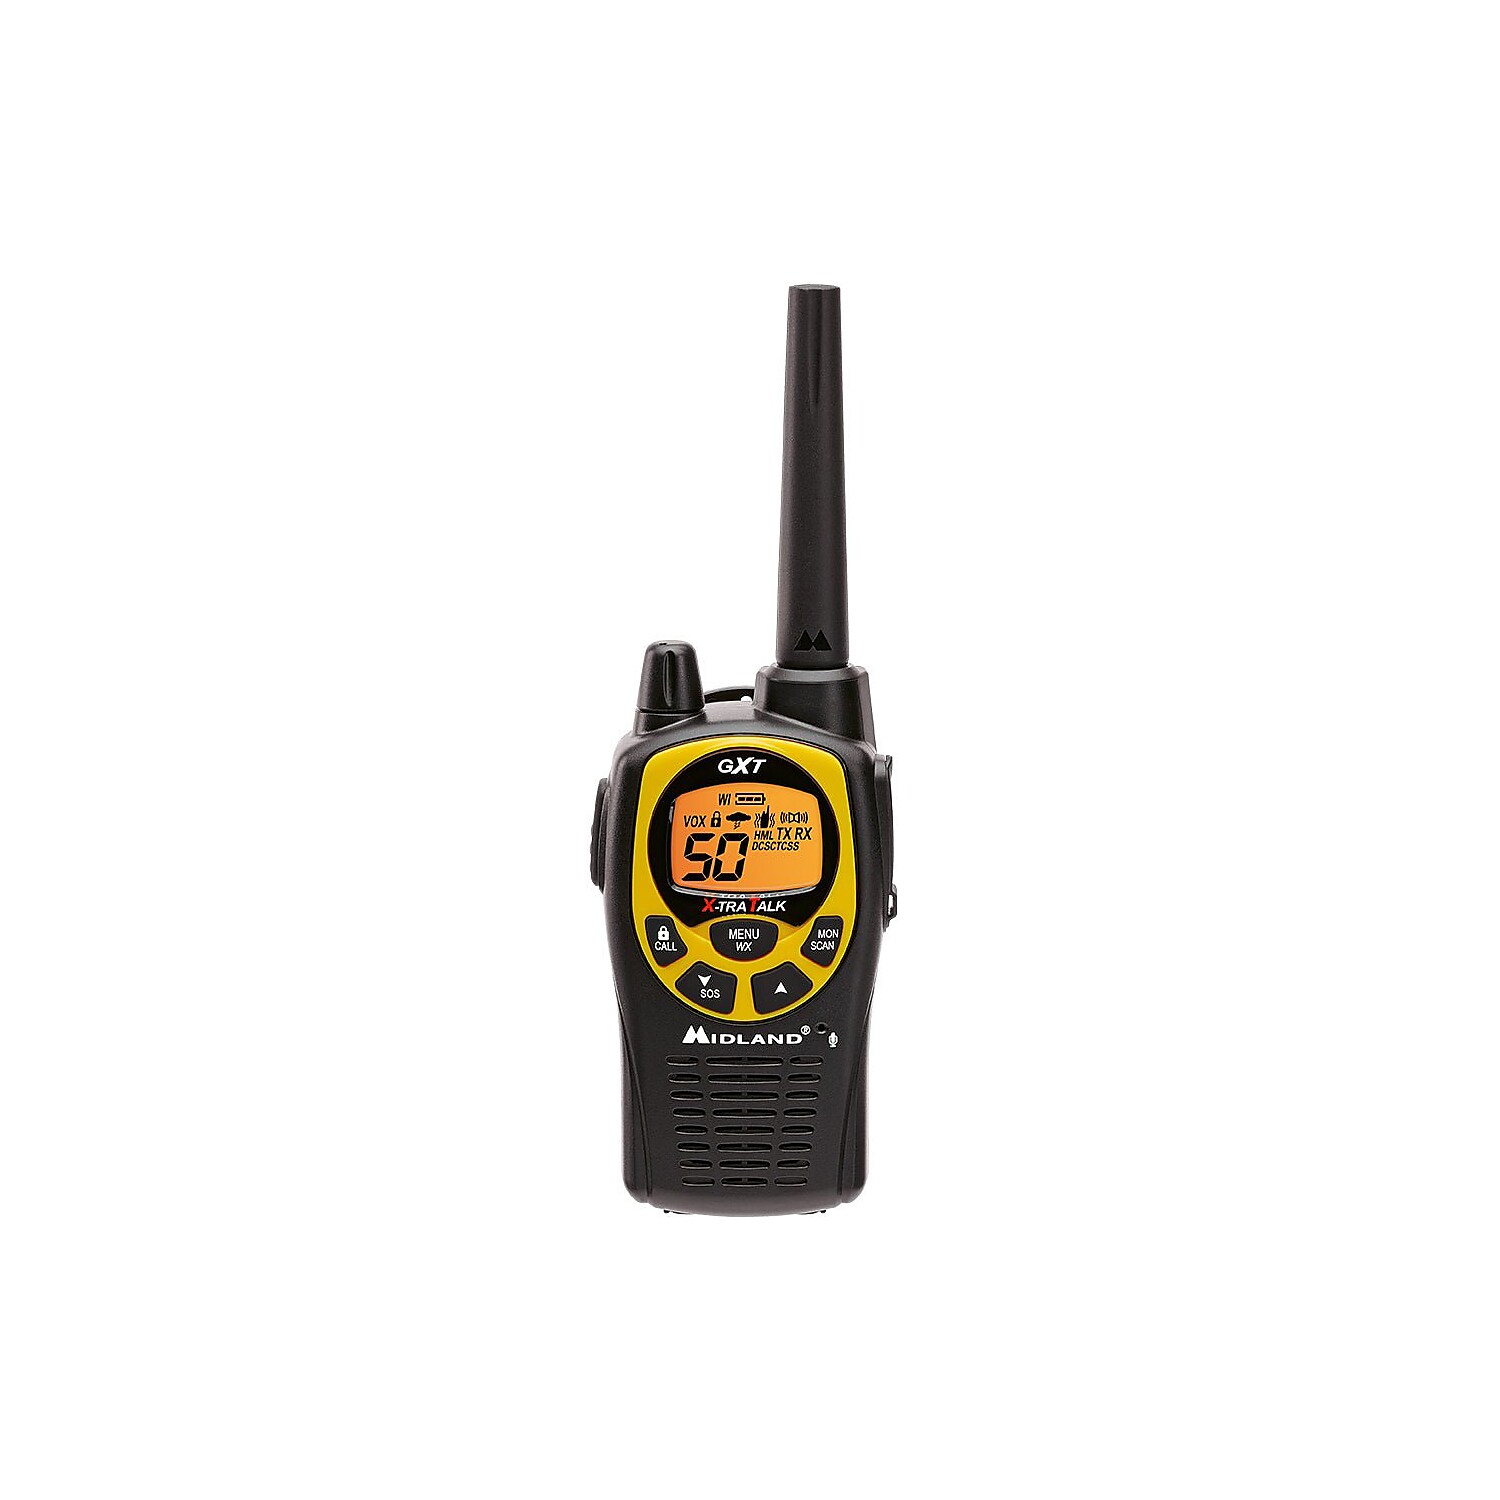 Midland GXT1000VP4 50 Channel GMRS Two-Way Radio Up to 36 Mile Range Walkie Talkie Black Silver (Pack of 8) - 3